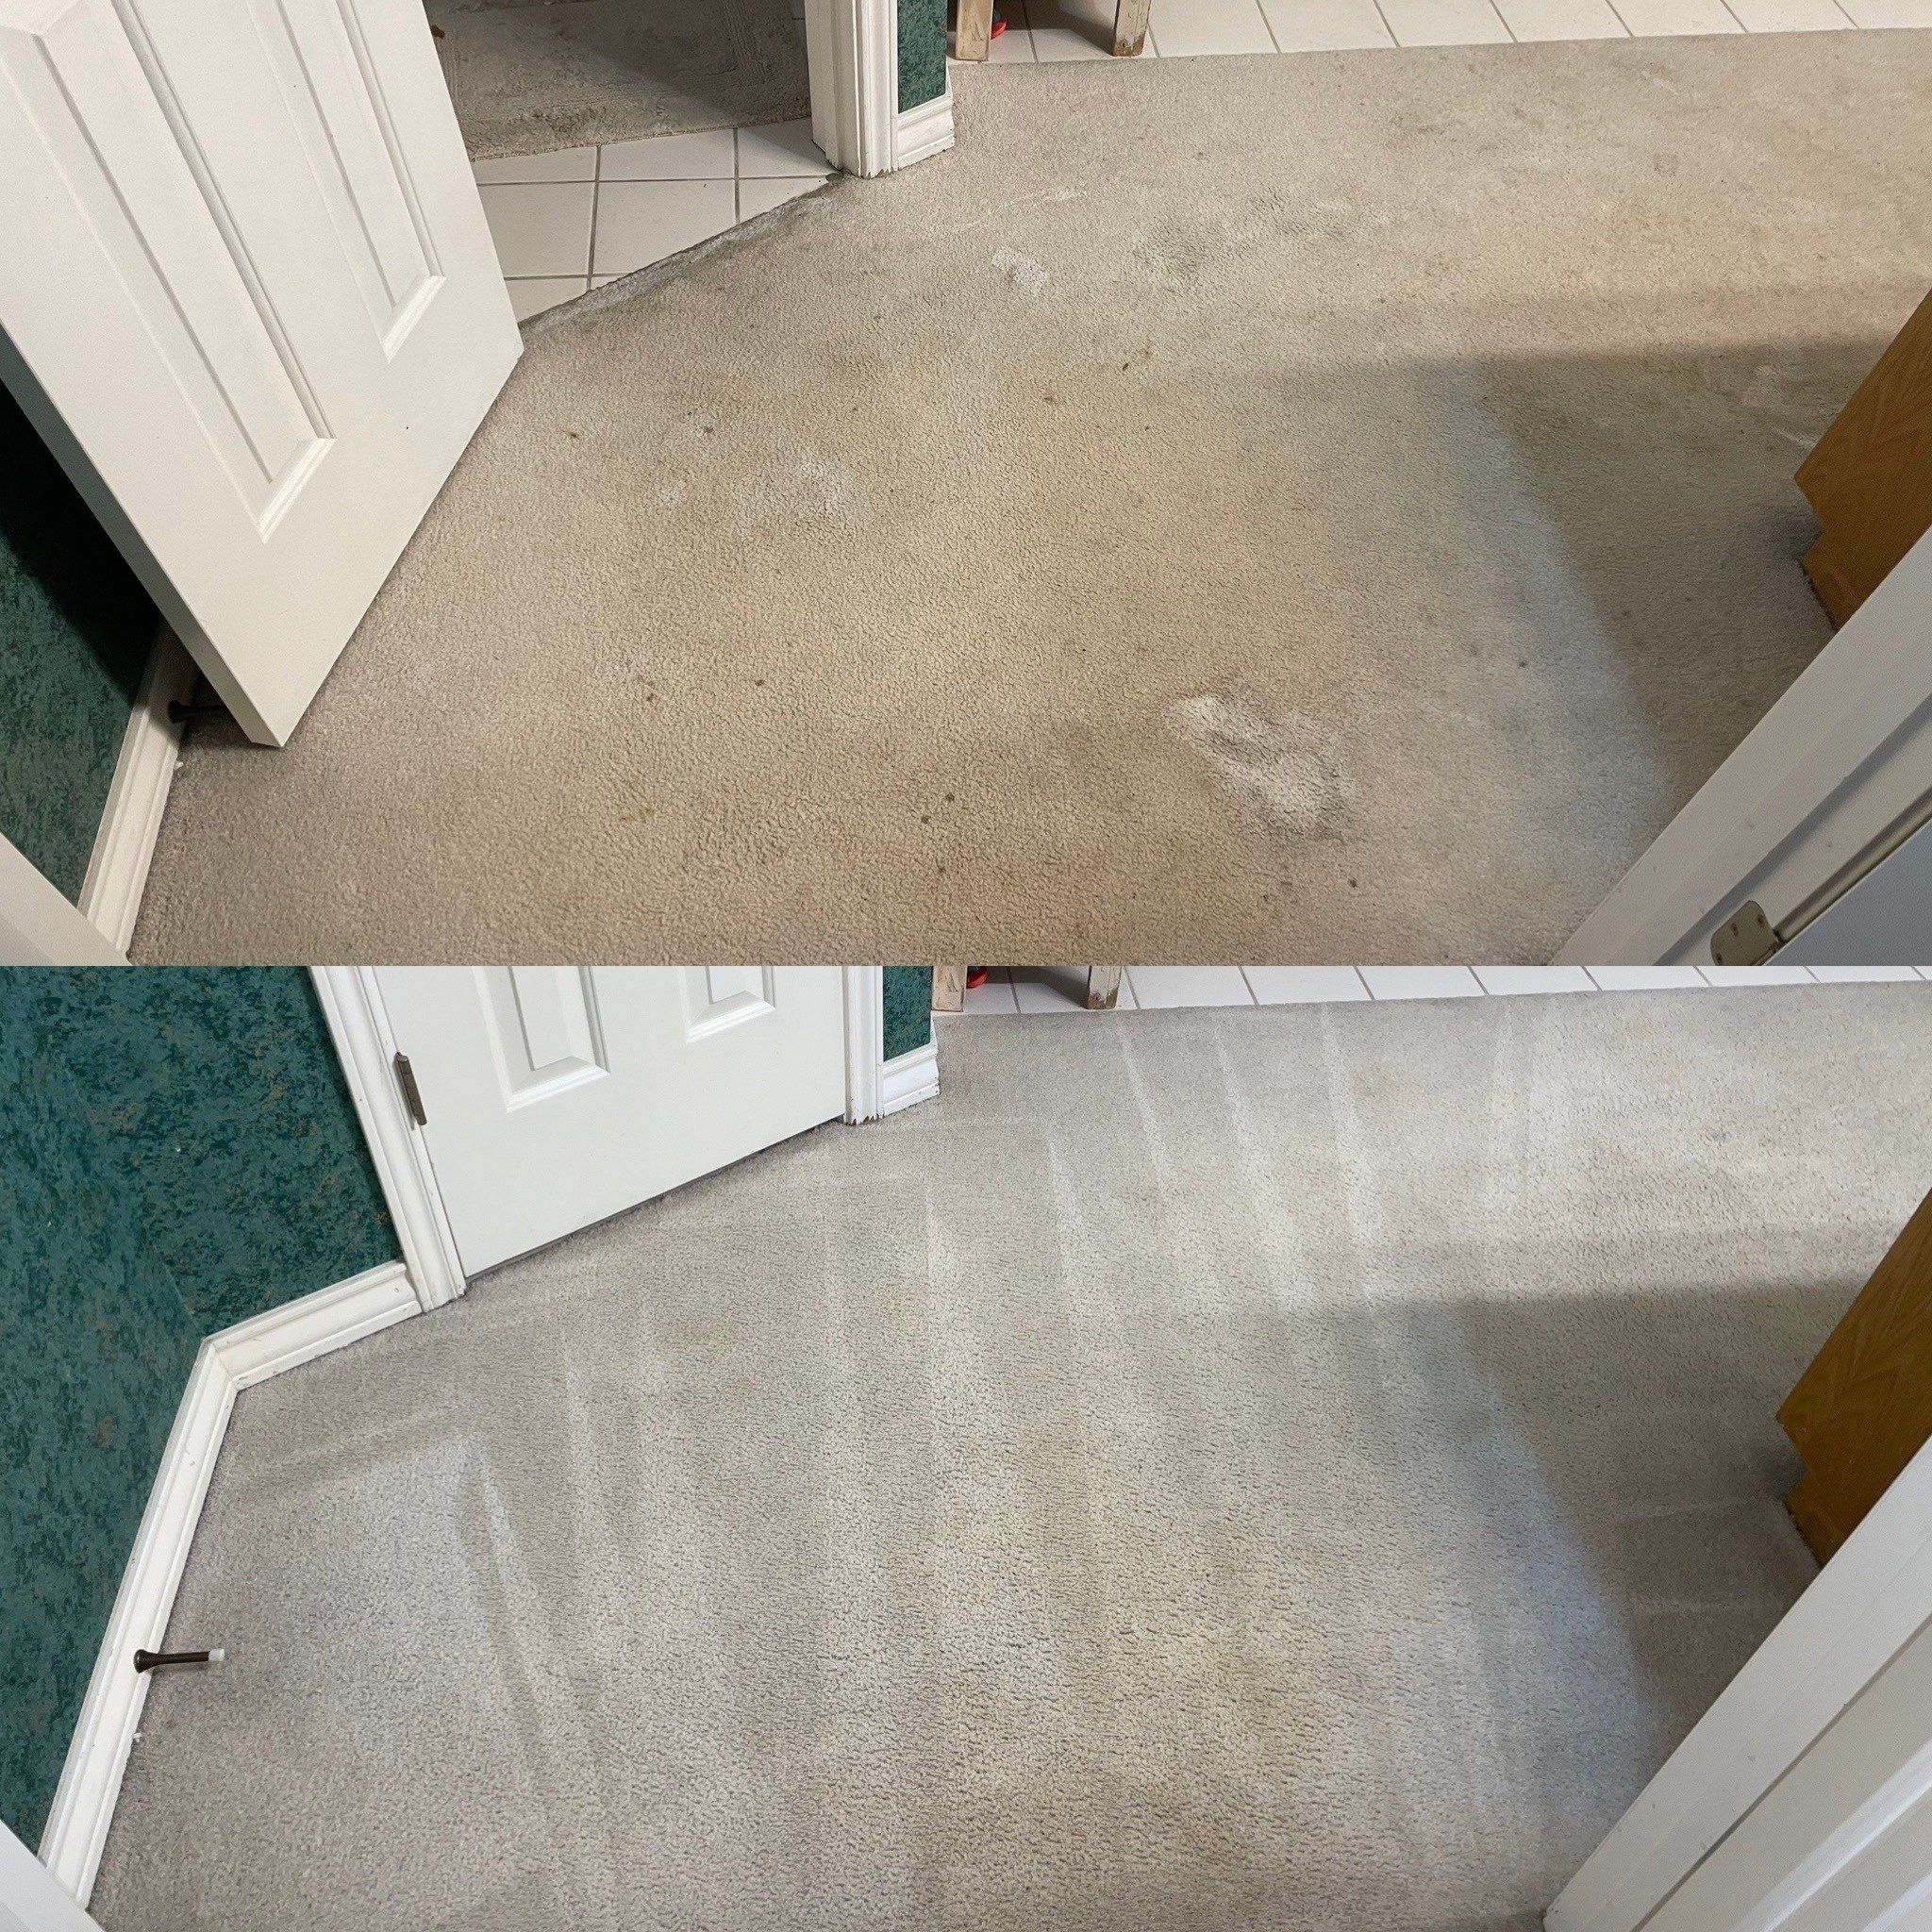 before and after deep carpet cleaning removing dirt stains restoring original color